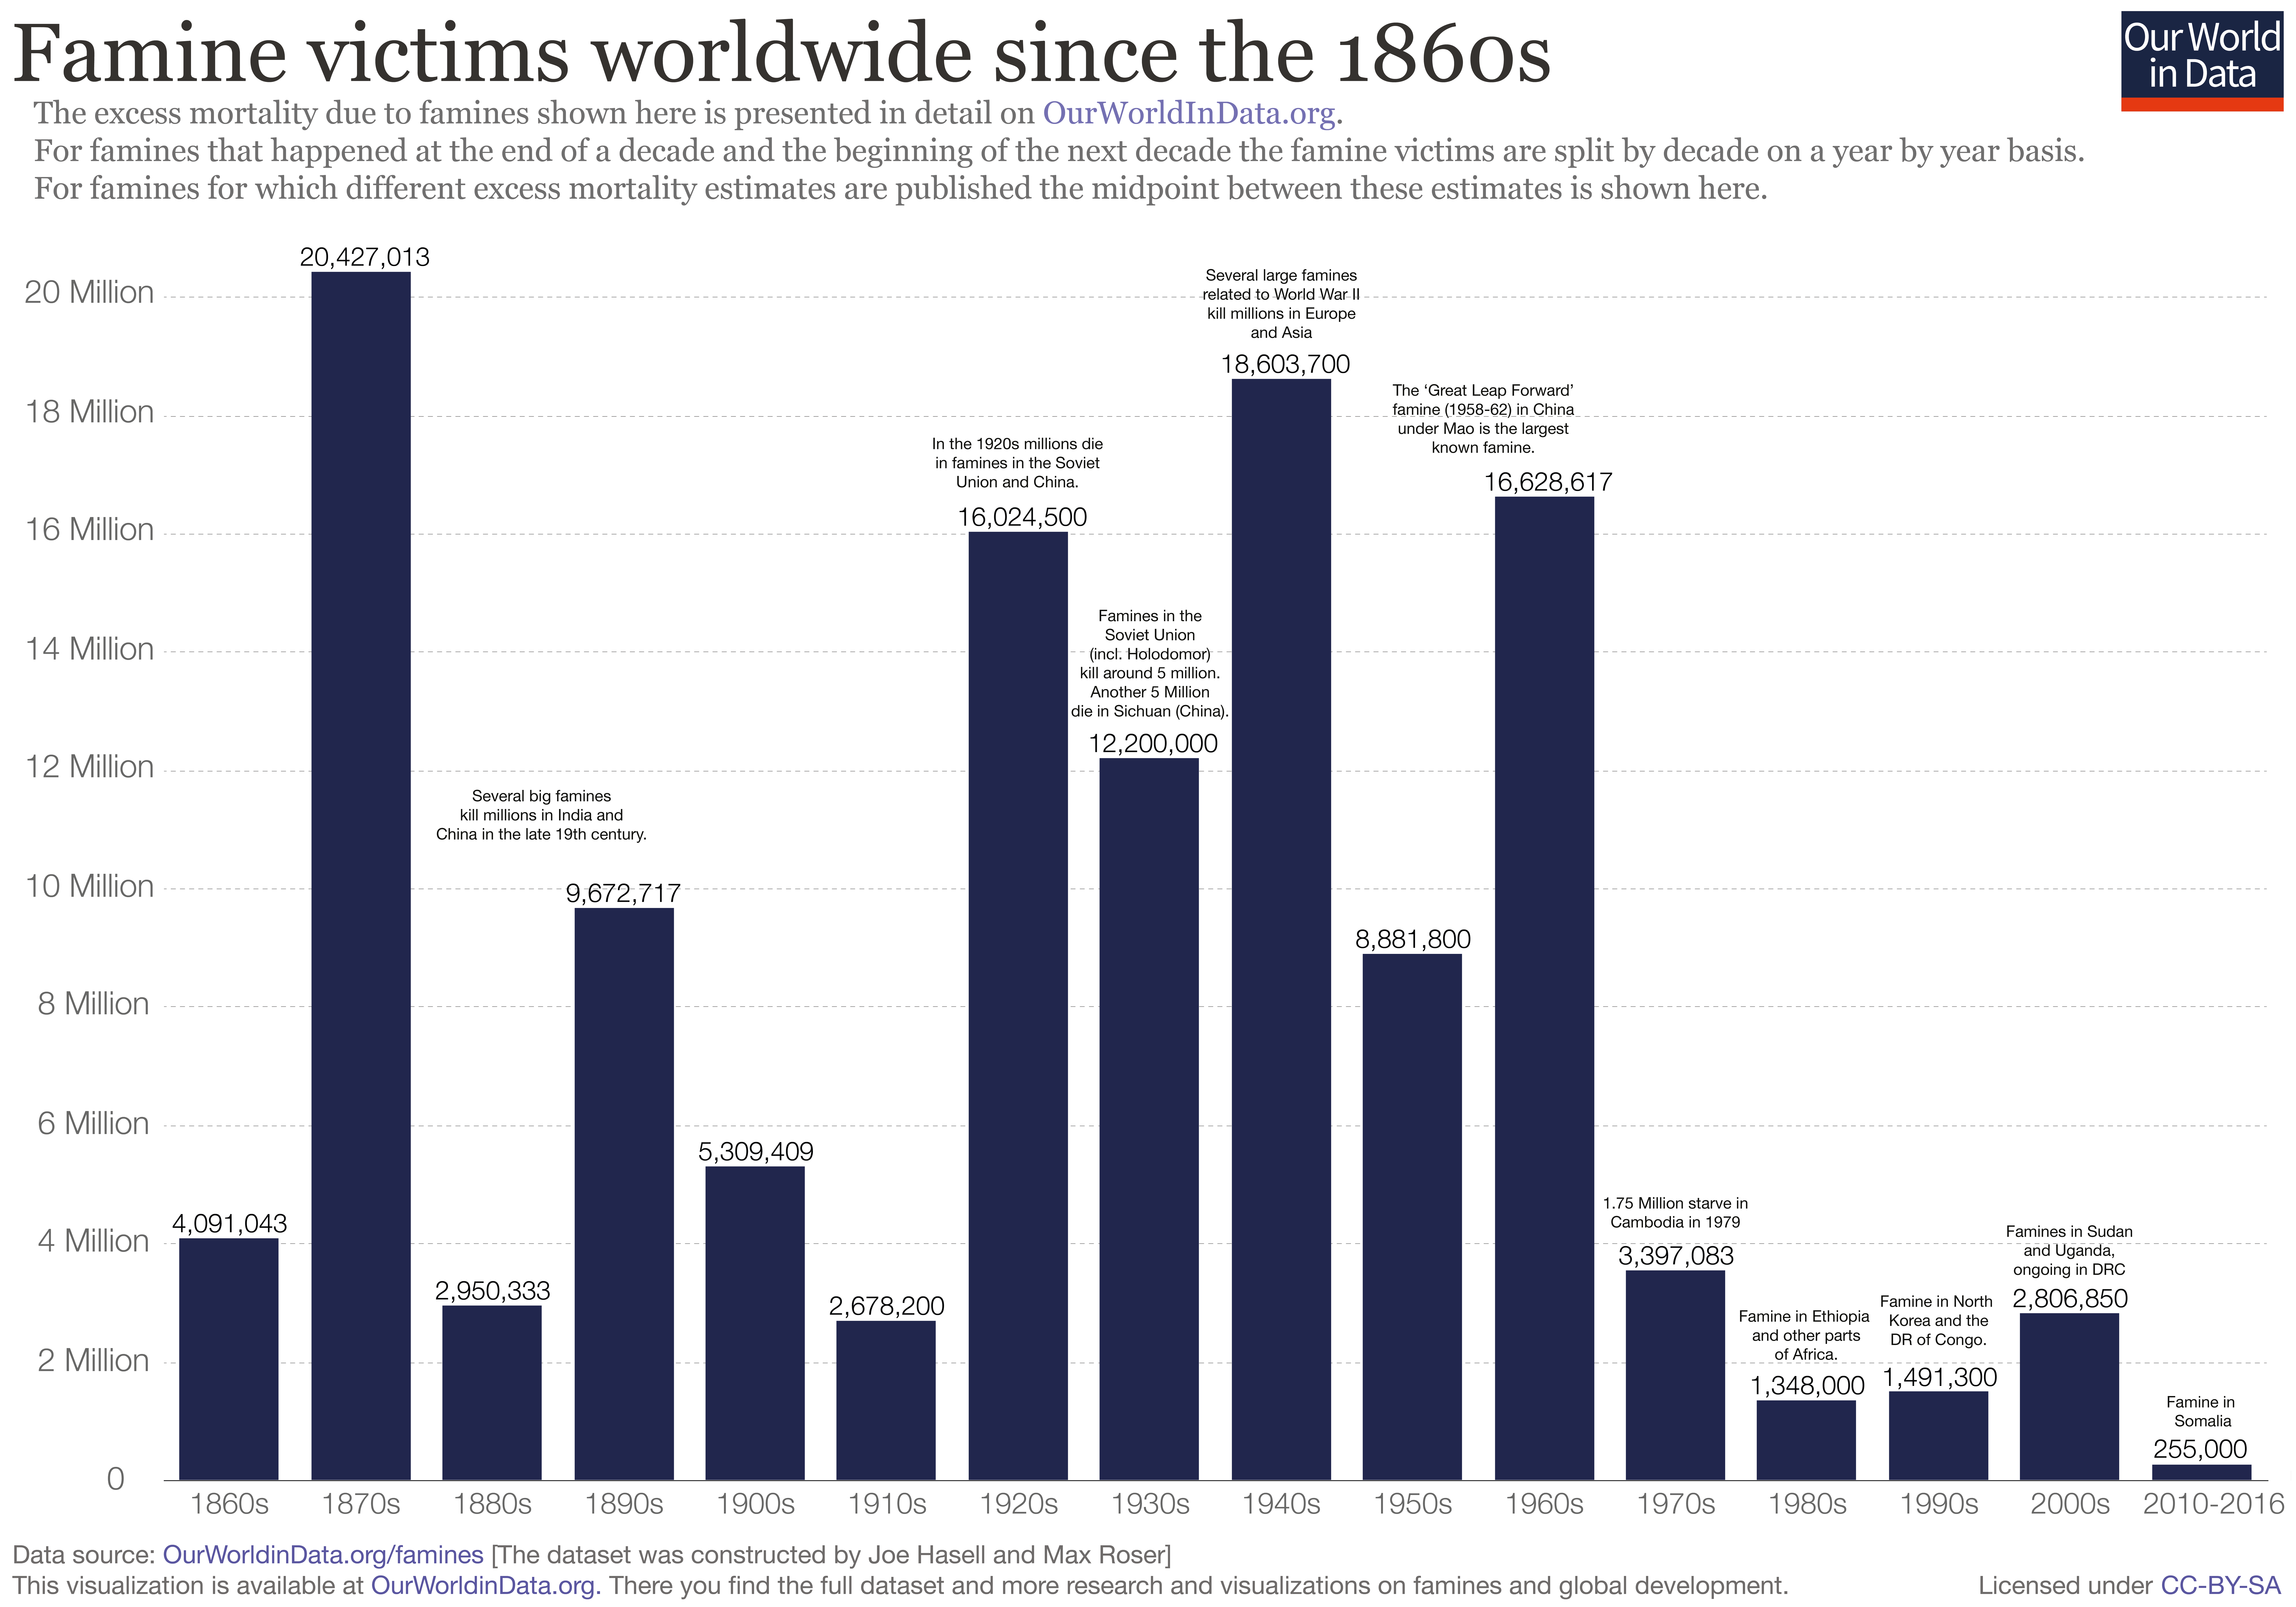 Famine victims since 1860s march18